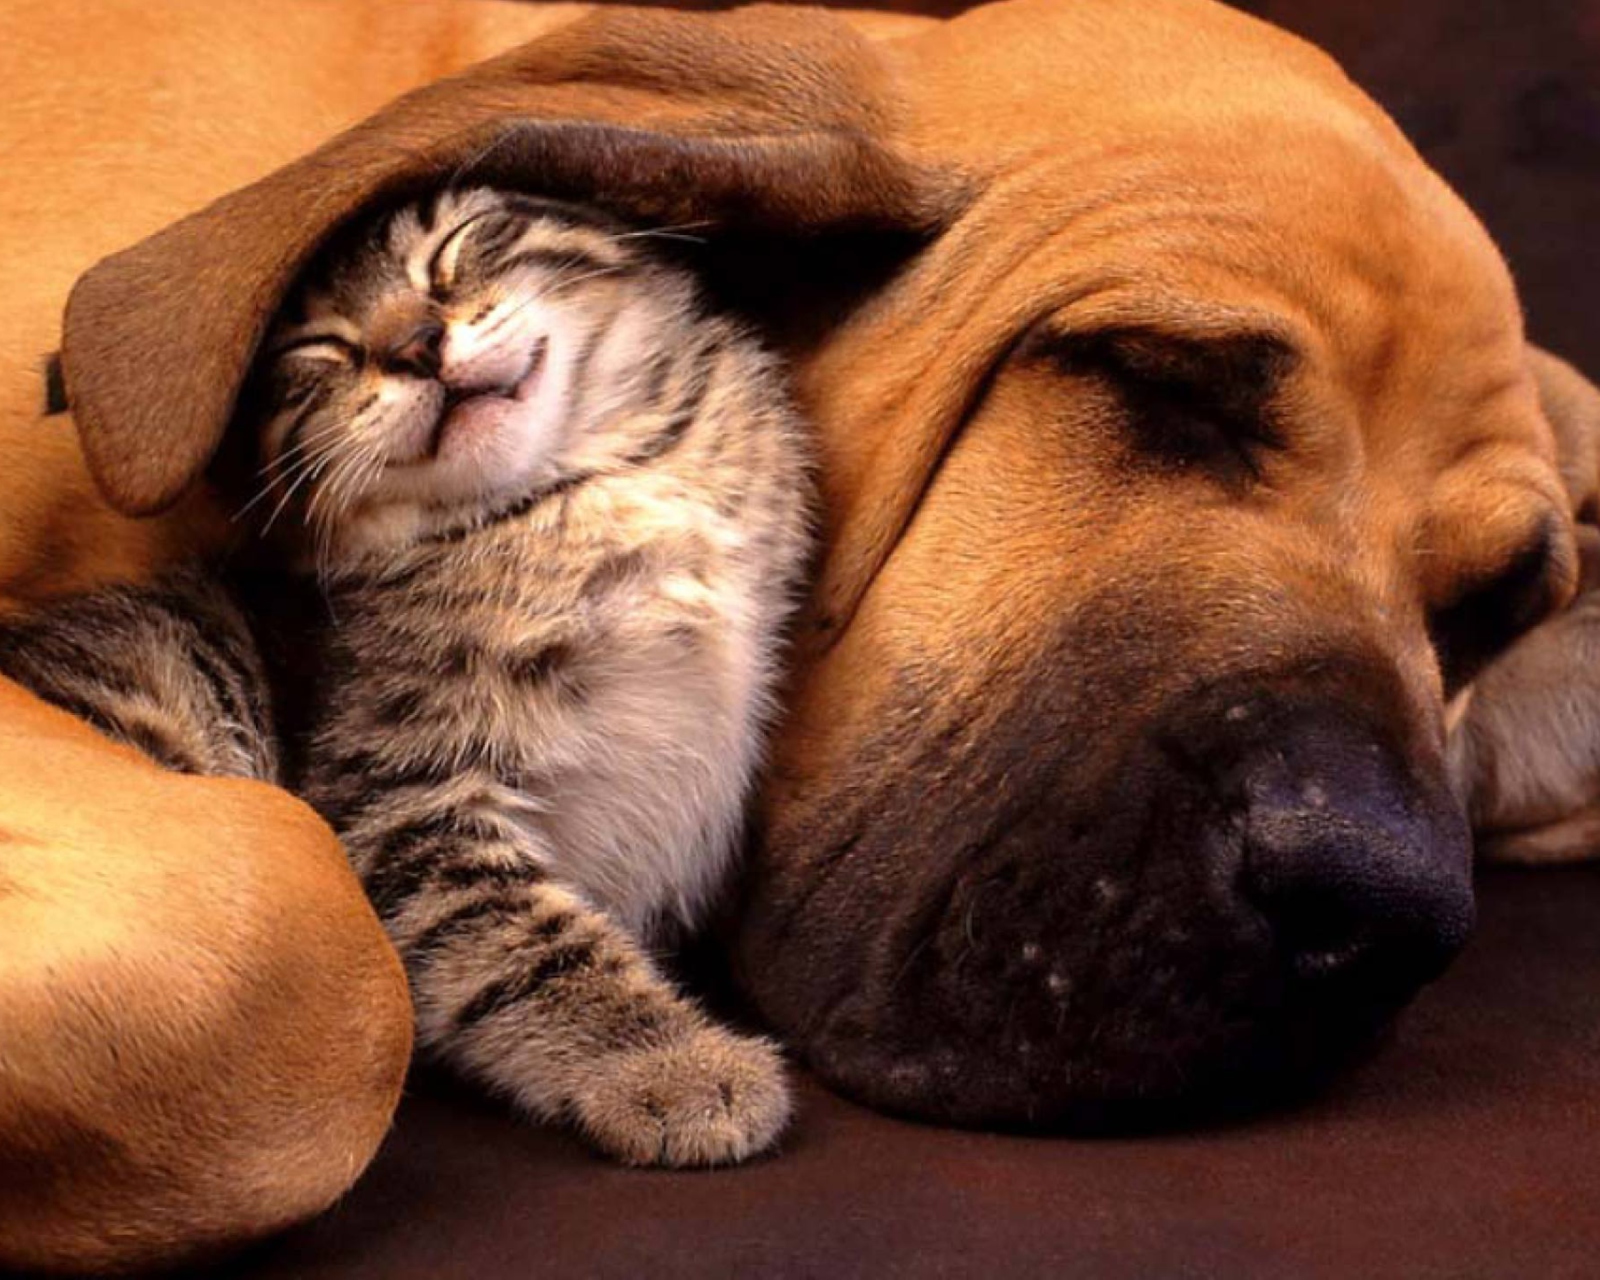 Cat and Dog Are Te Best Friend wallpaper 1600x1280